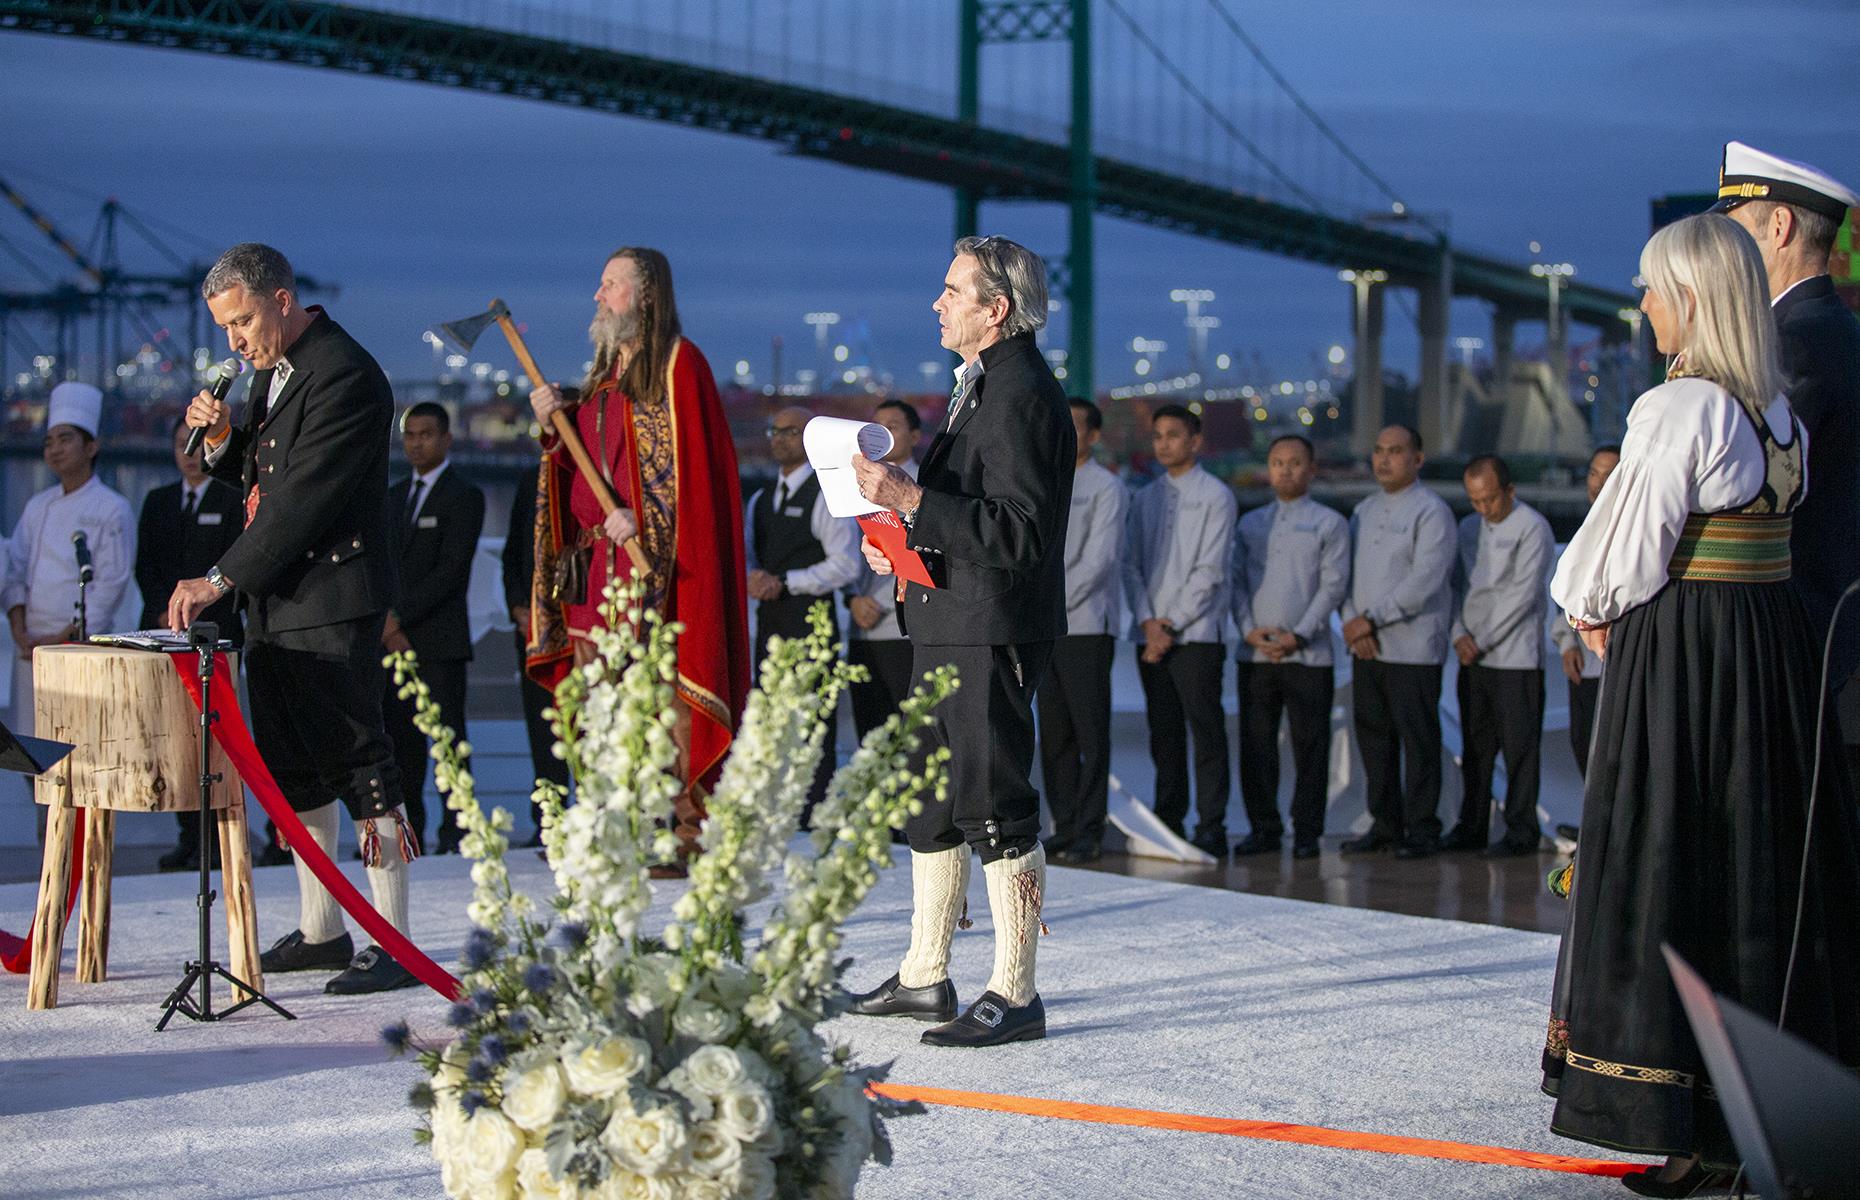 <p>Simply swinging a bottle against the side of a ship is so passé. In January 2023 <a href="https://www.vikingcruises.co.uk">Viking</a> christened new luxury ship Viking Neptune. The ship’s godmother Nicole Stott (a retired NASA astronaut) used a traditional Viking broad ax to cut the rope, which sent a bottle of fizz smashing into the ship. A 13-day Mediterranean Odyssey cruise with Viking costs $5,911.</p>